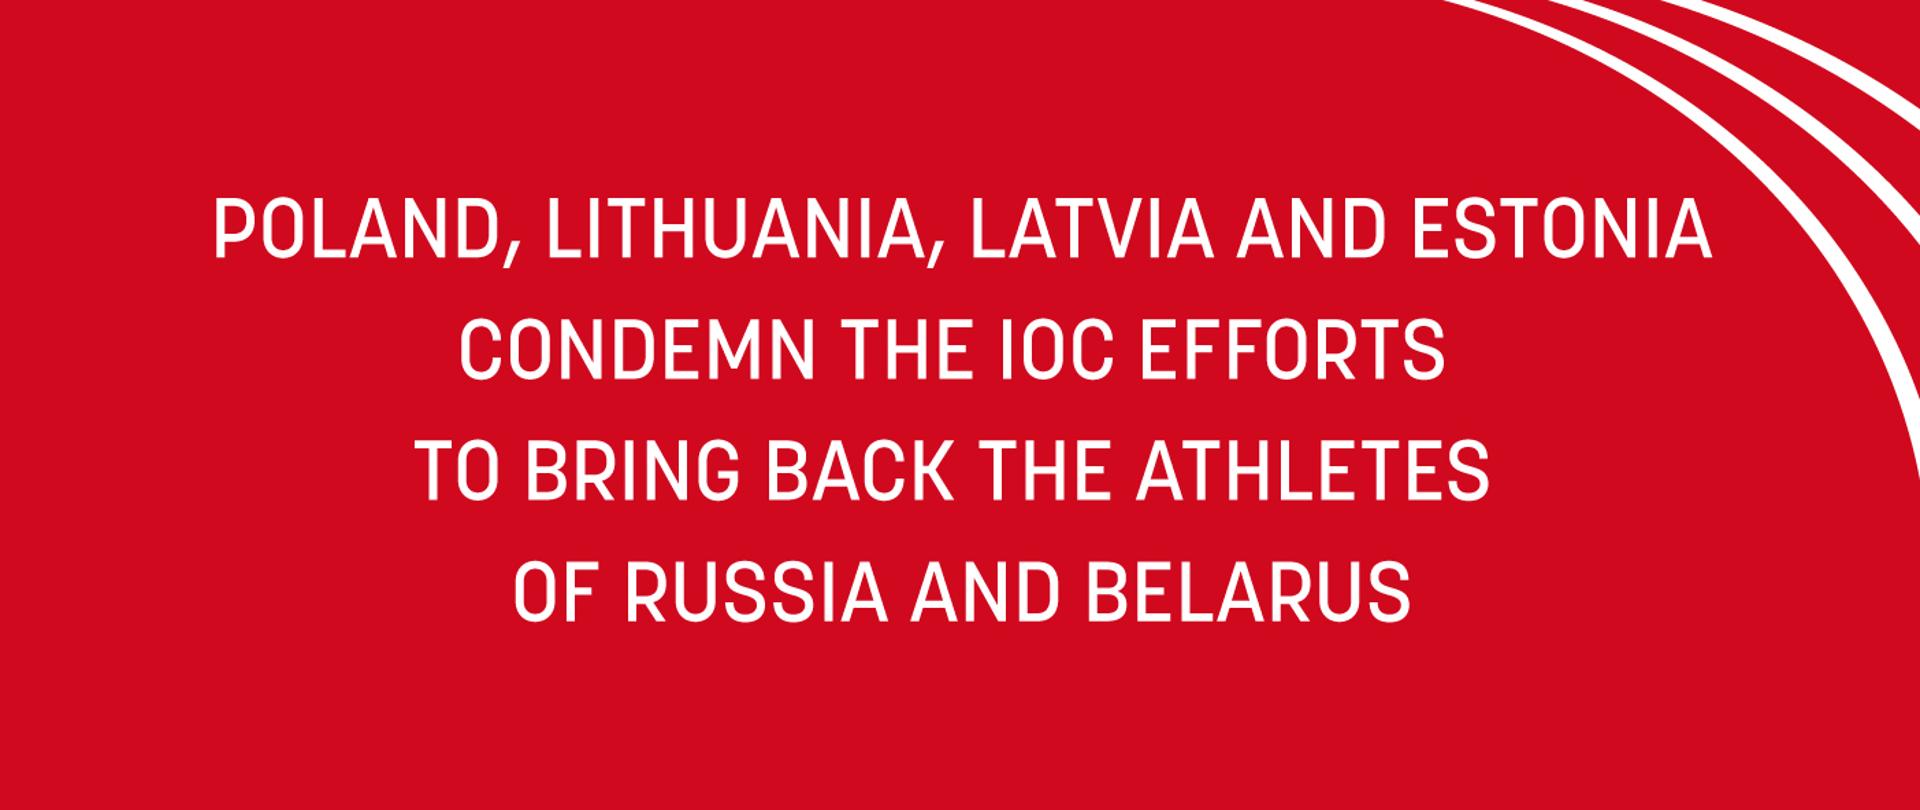 Red banner with white letters: POLAND, LITHUANIA, LATVIA AND ESTONIA CONDEMN THE IOC EFFORTS TO BRING BACK THE ATHLETES OF RUSSIA AND BELARUS.
Three white arches in the upper right corner of the banner.